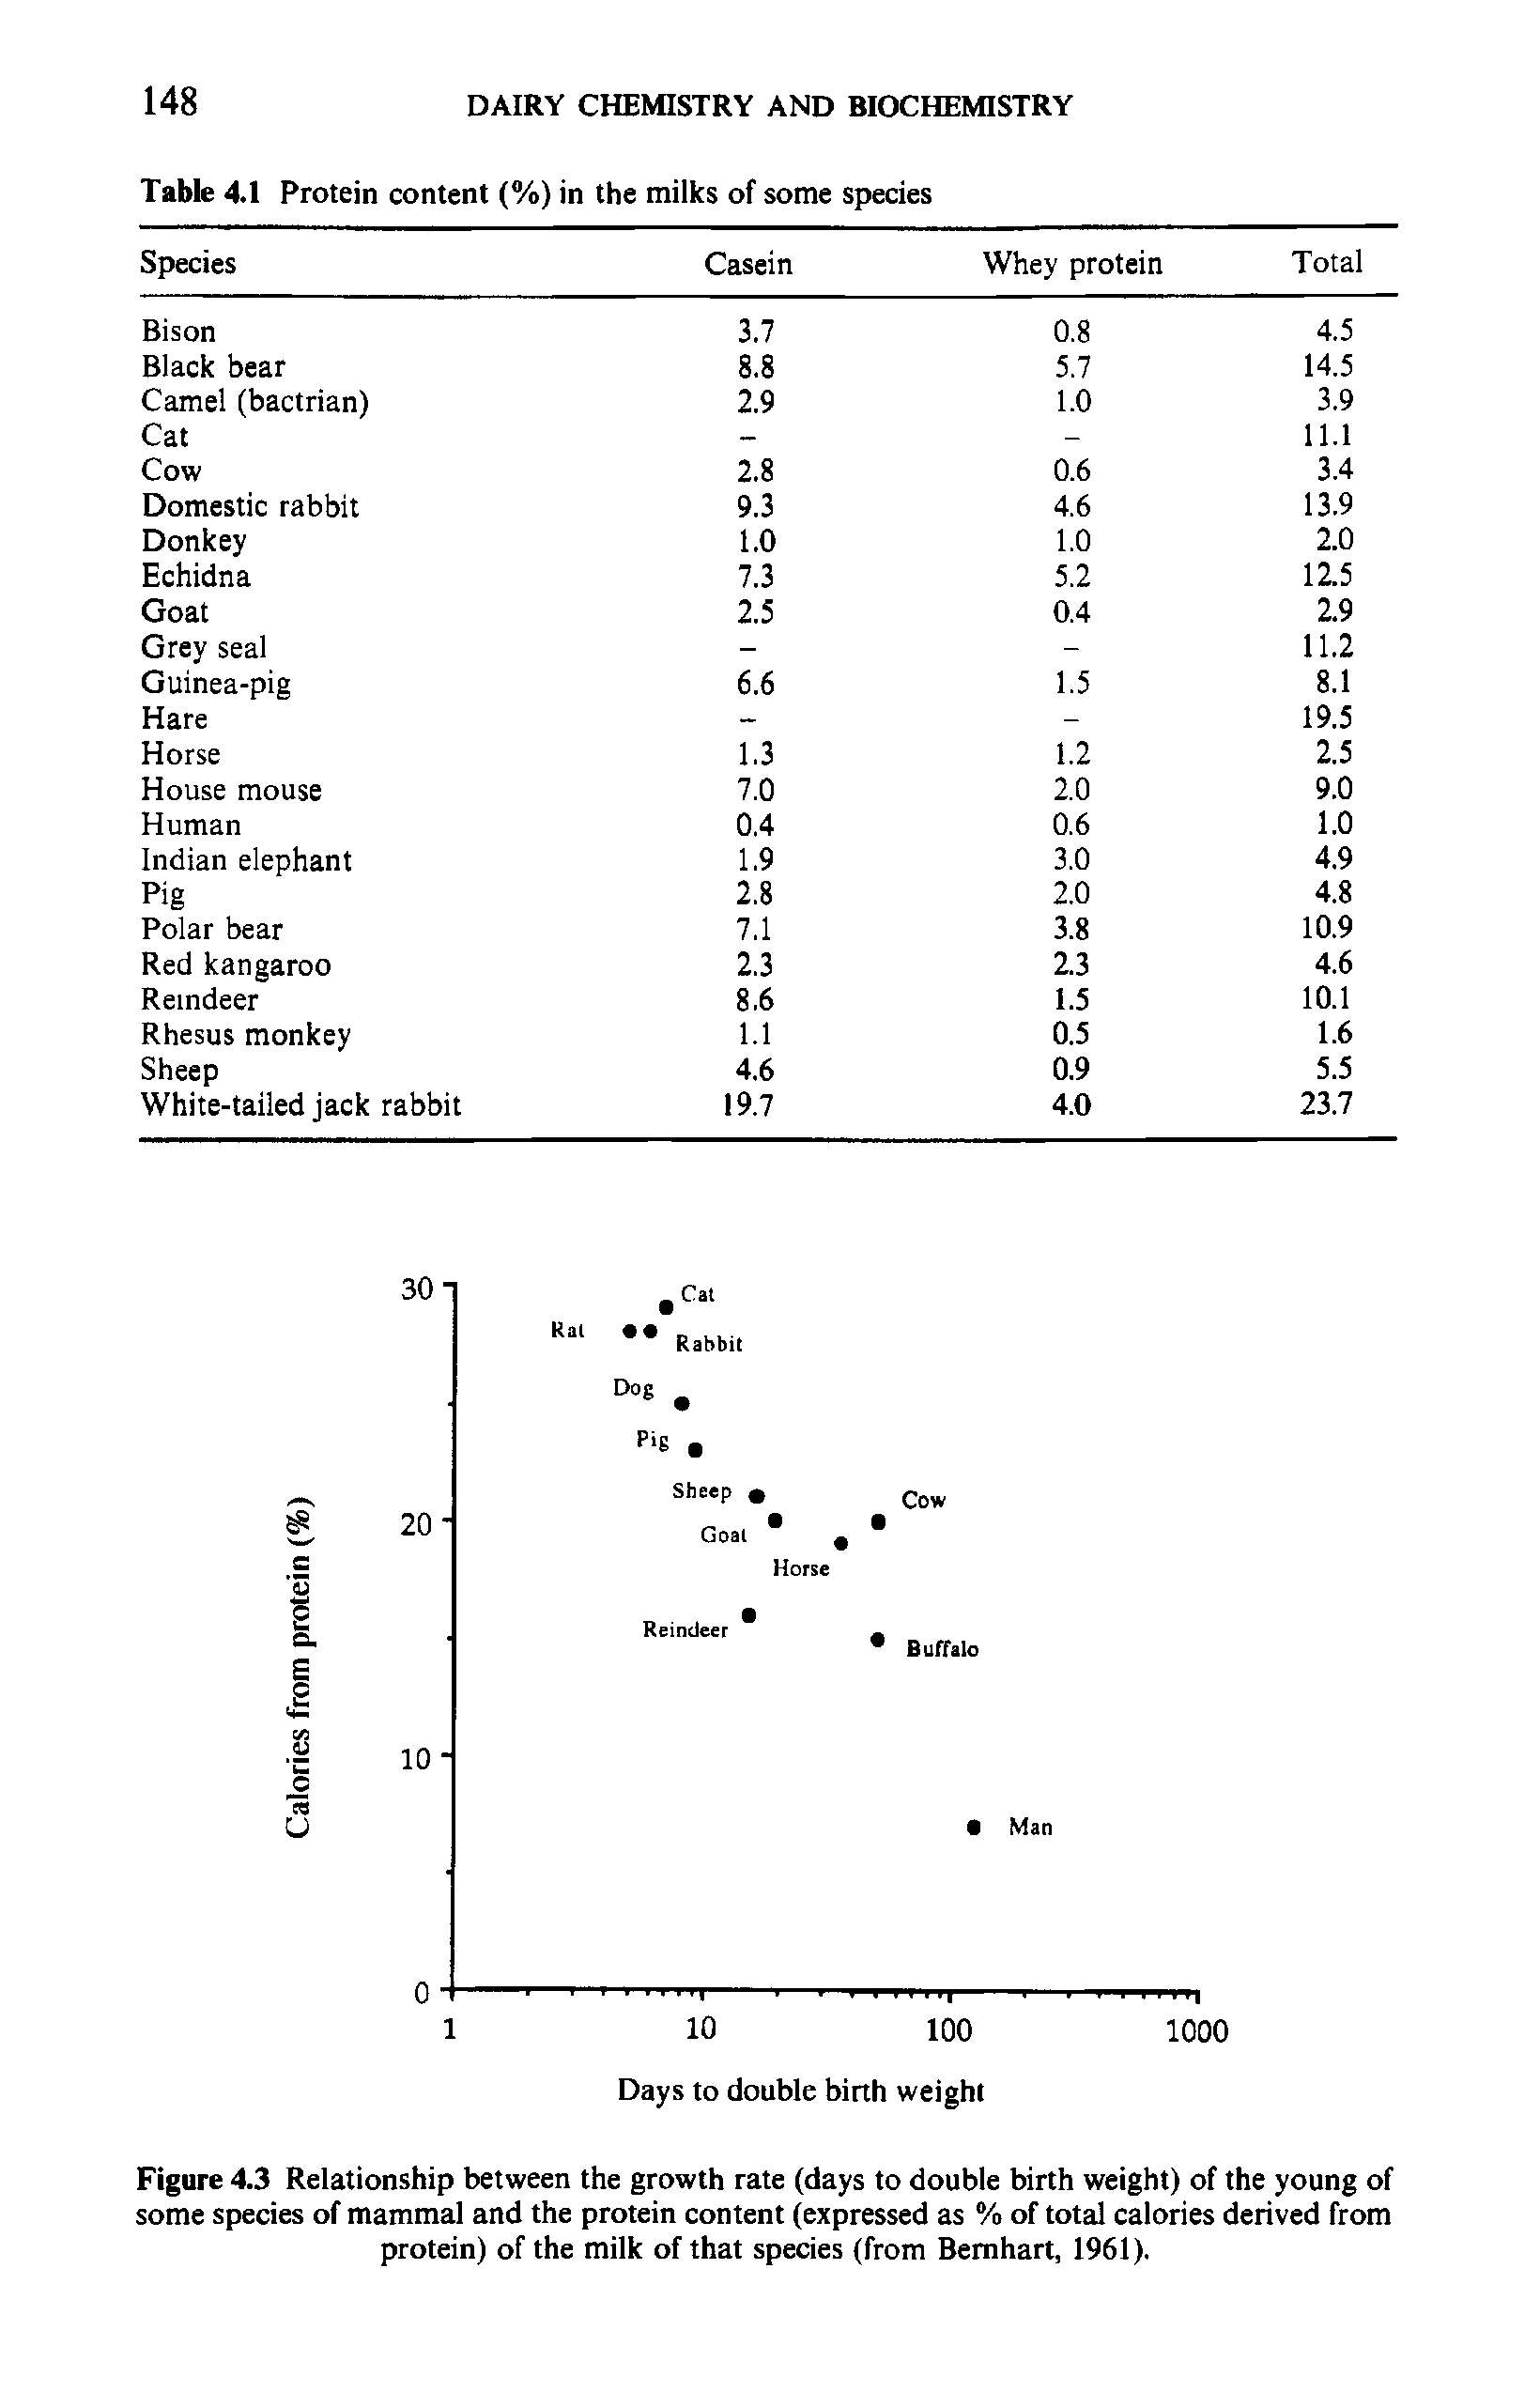 Figure 4.3 Relationship between the growth rate (days to double birth weight) of the young of some species of mammal and the protein content (expressed as % of total calories derived from protein) of the milk of that species (from Bemhart, 1961).